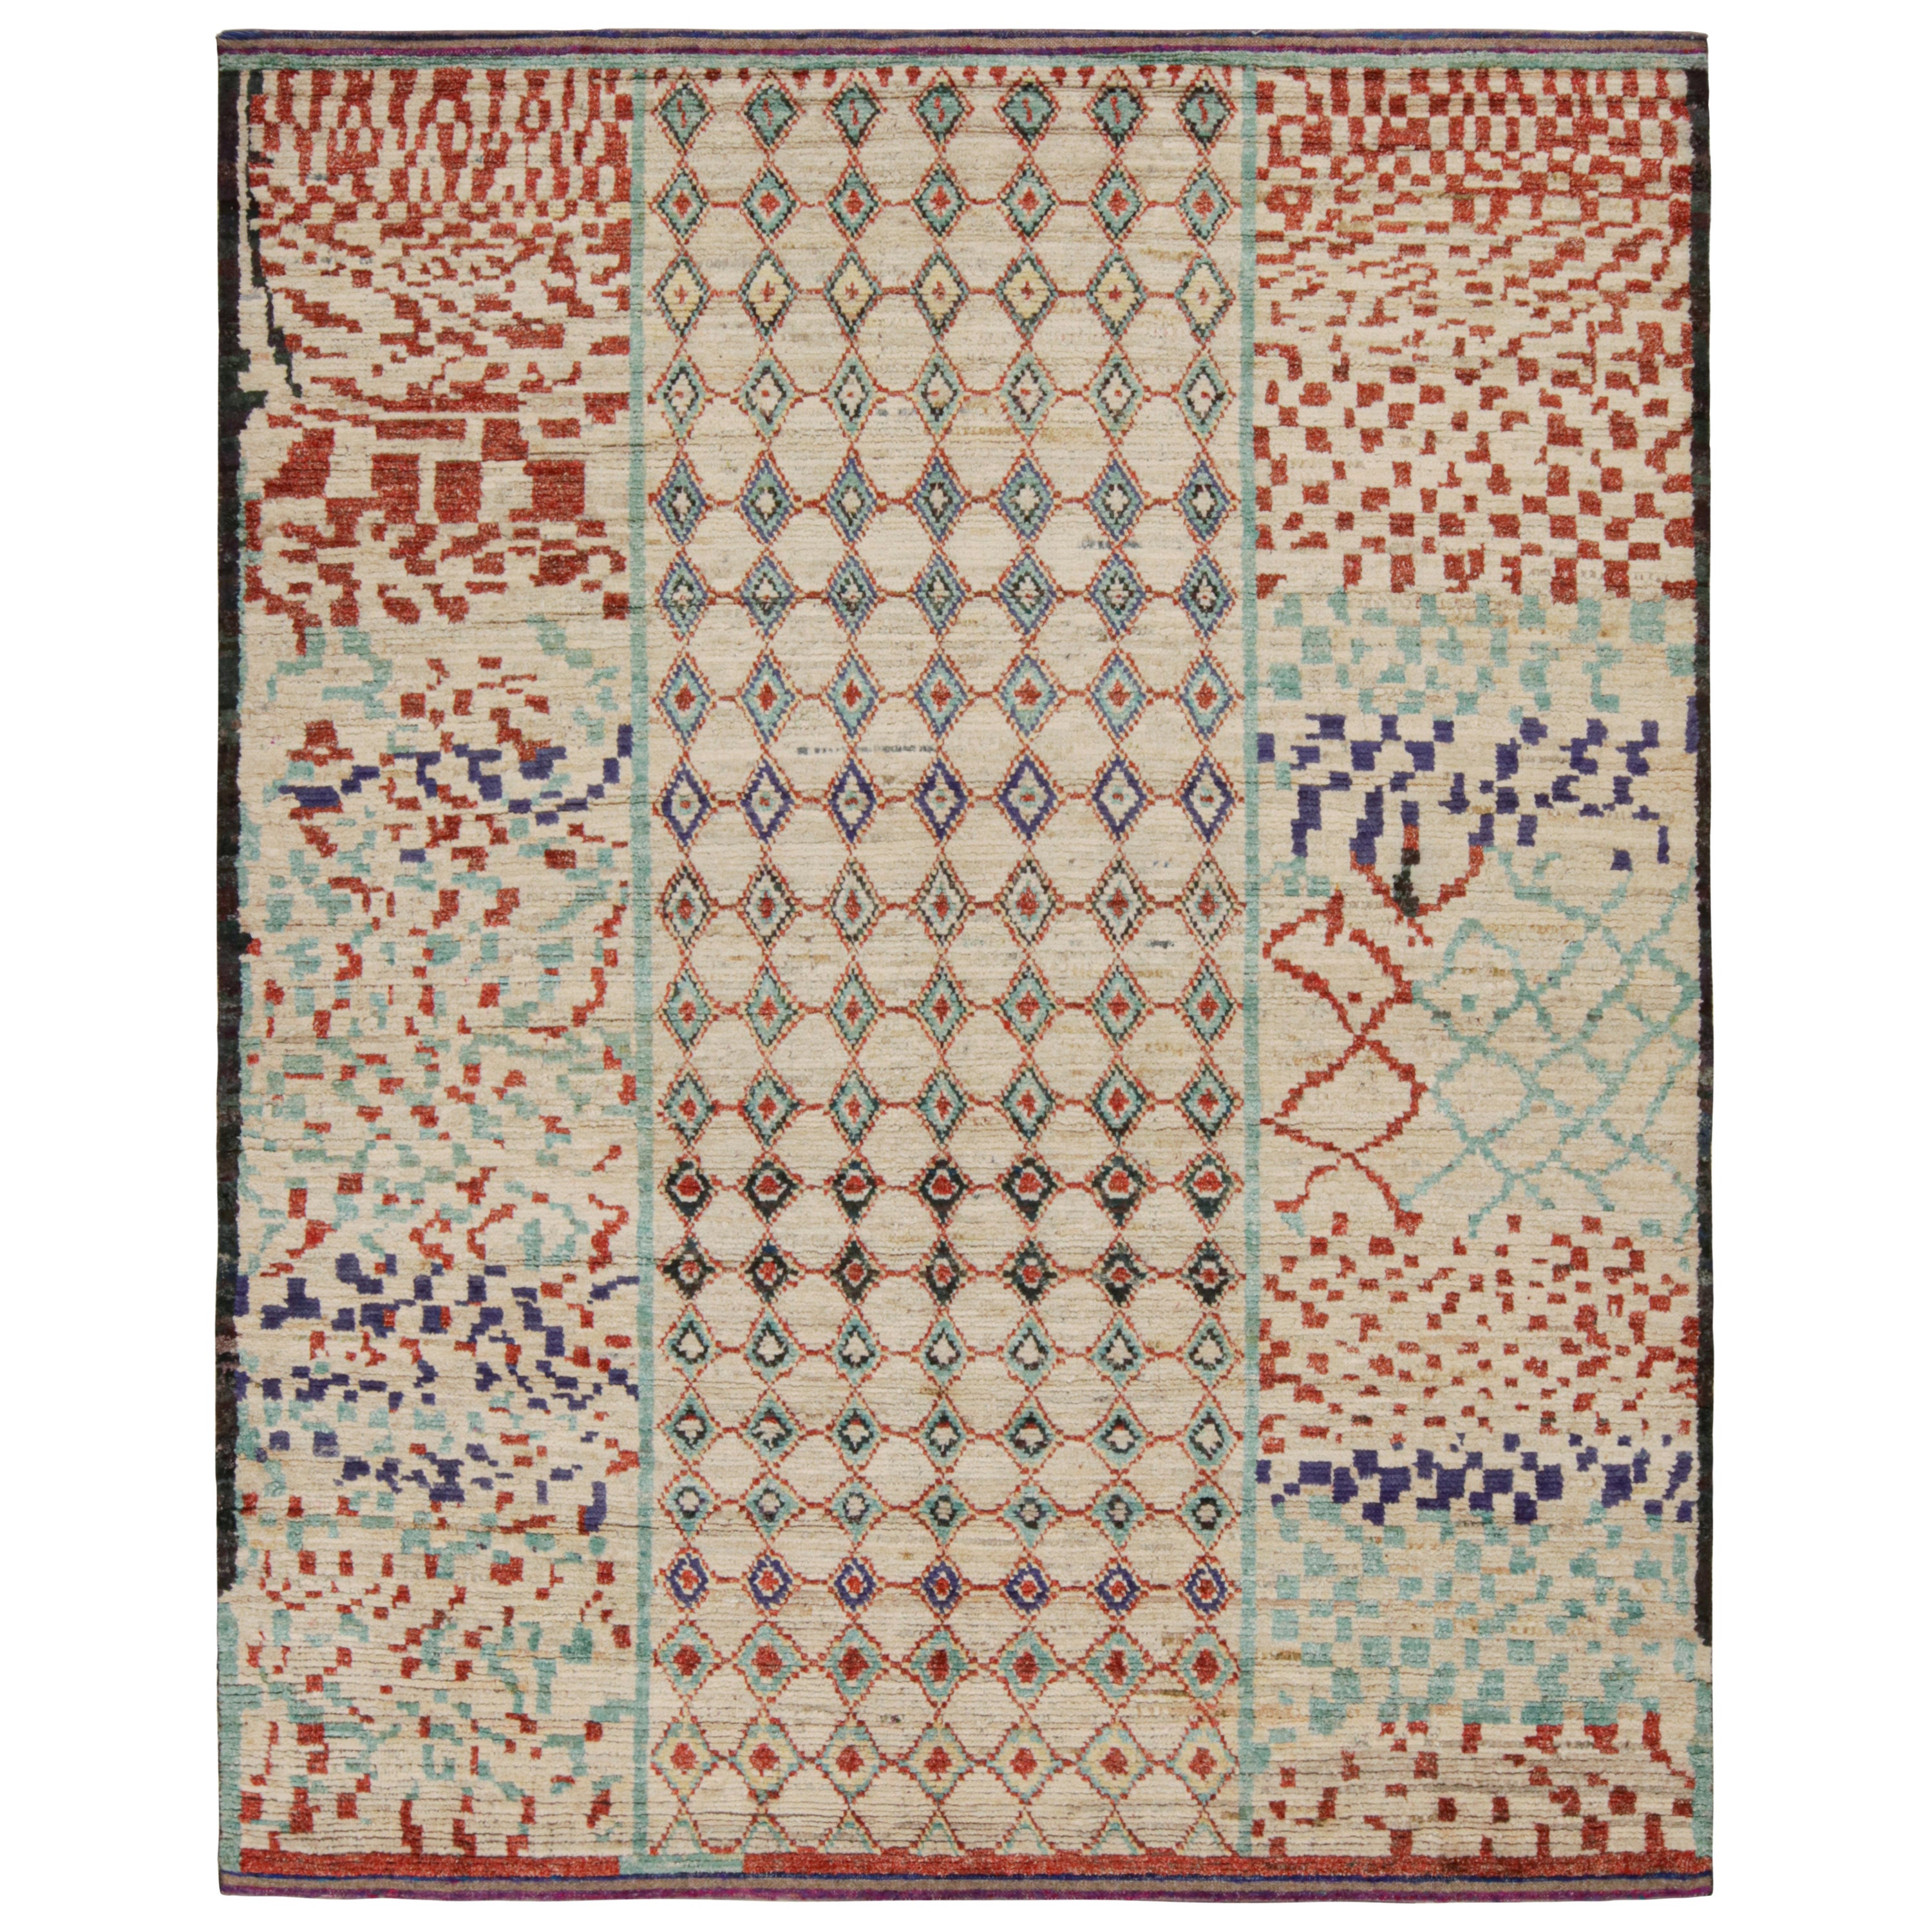 Rug & Kilim’s Moroccan Style Rug in Beige, Red & Blue Geometric Patterns For Sale